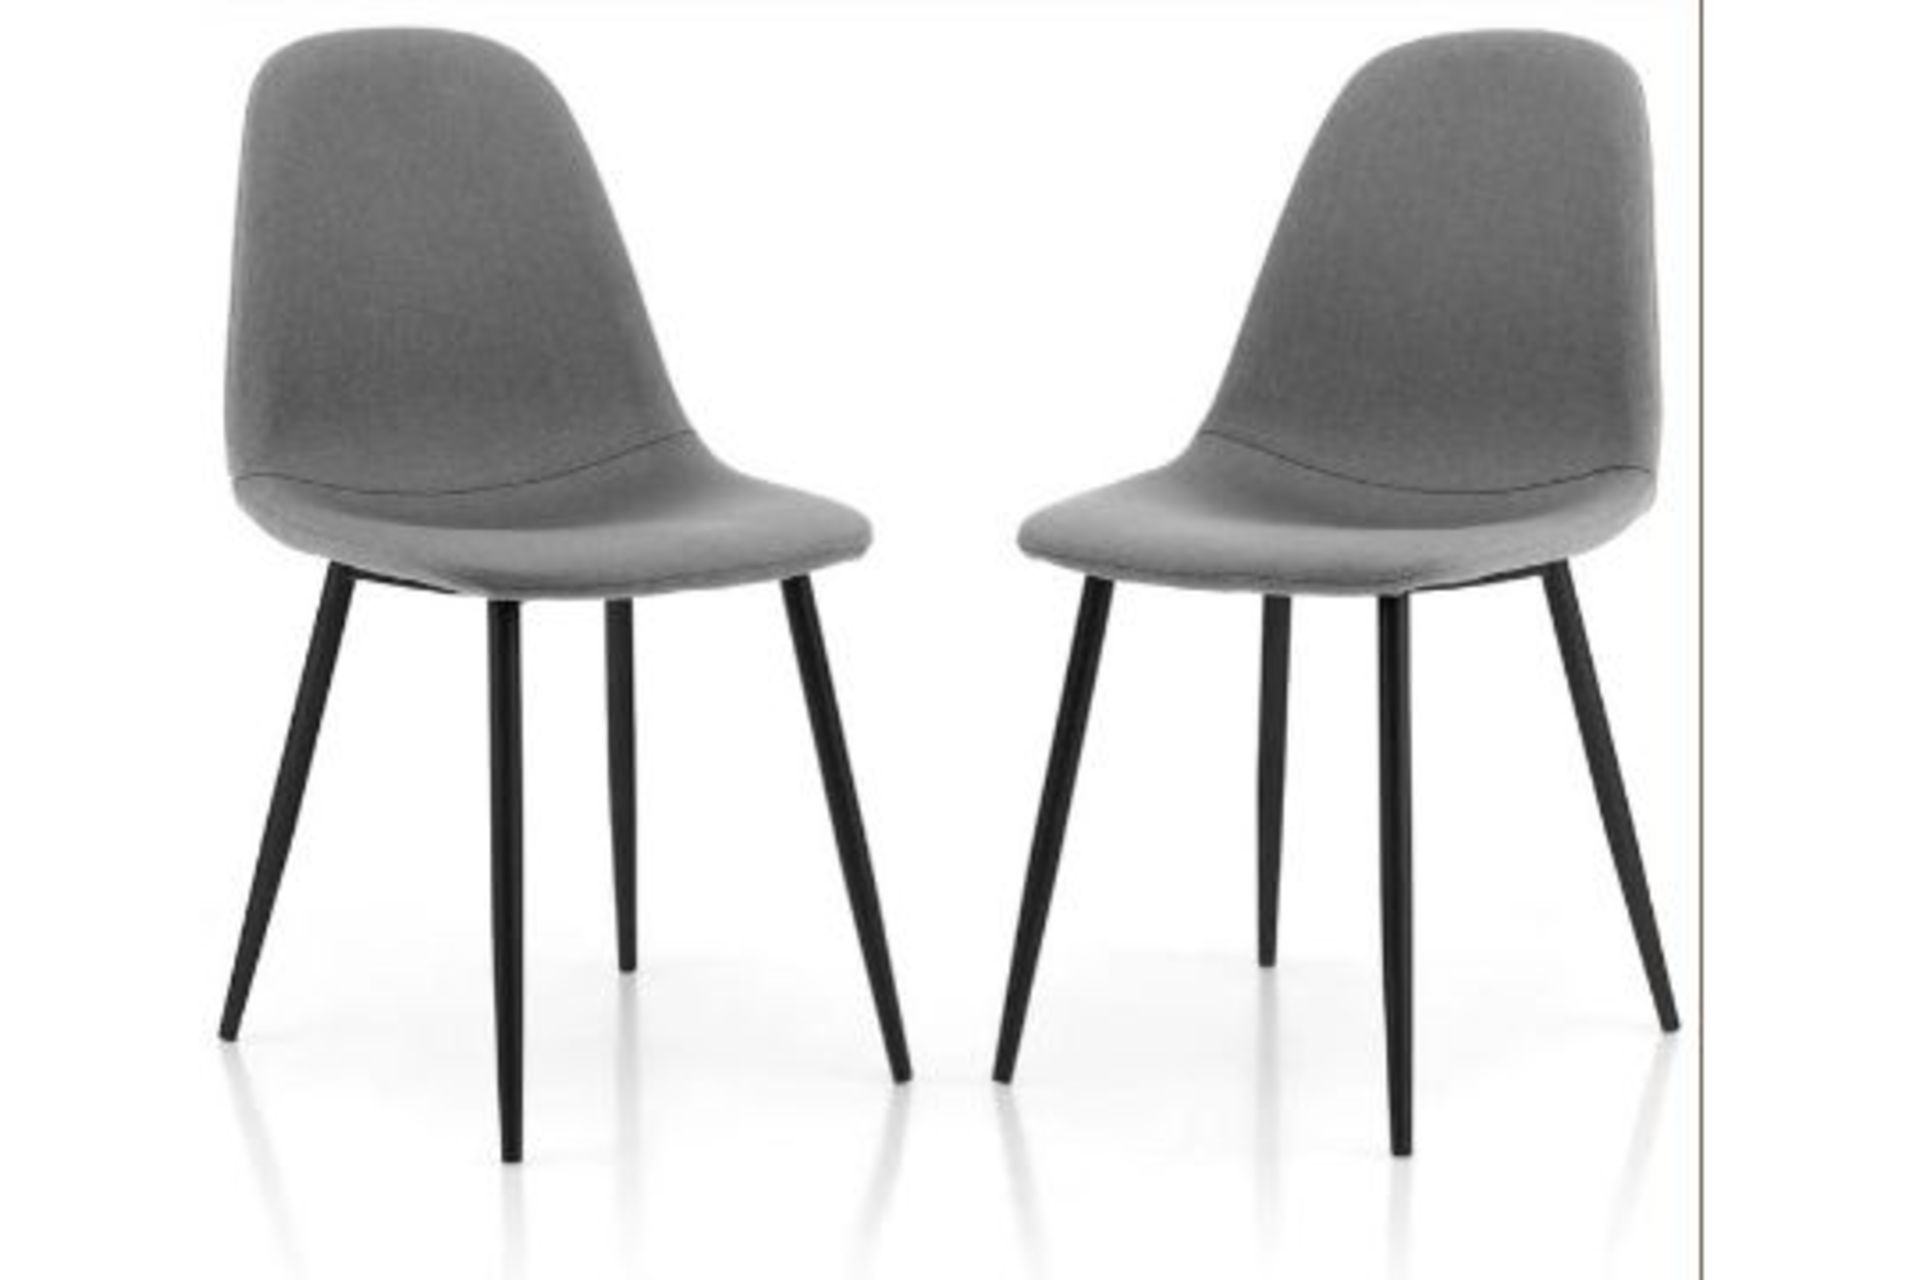 UPHOLSTERED DINING CHAIRS SET OF 2 WITH METAL LEGS-GREY. - R14.8. The high rebound foam